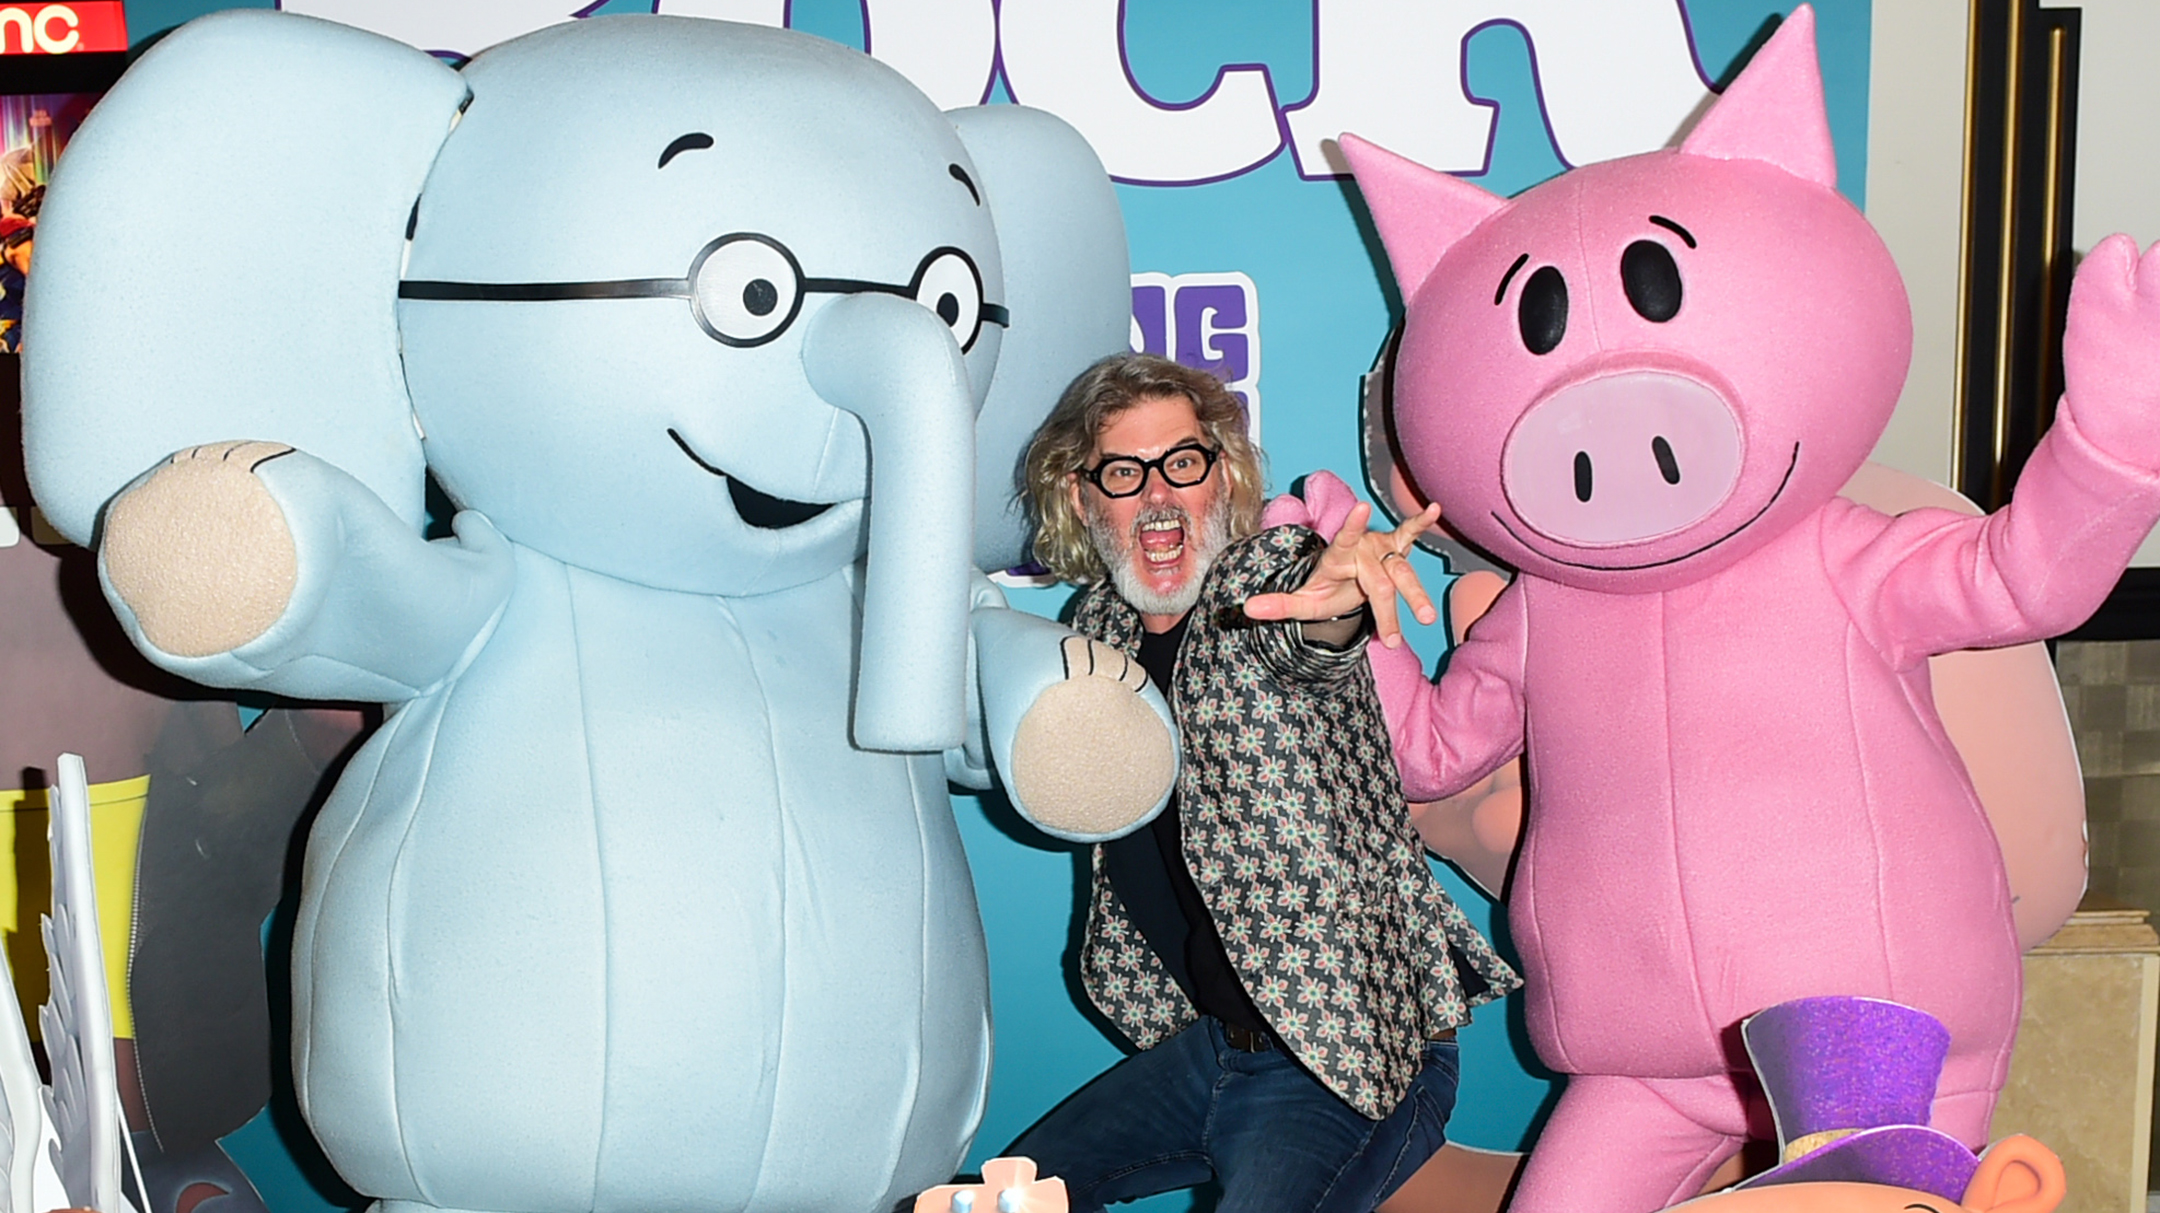 A man in a blazer and black glasses makes a wild expression while being flanked by costumed characters of an elephant on the left and a pig on the right